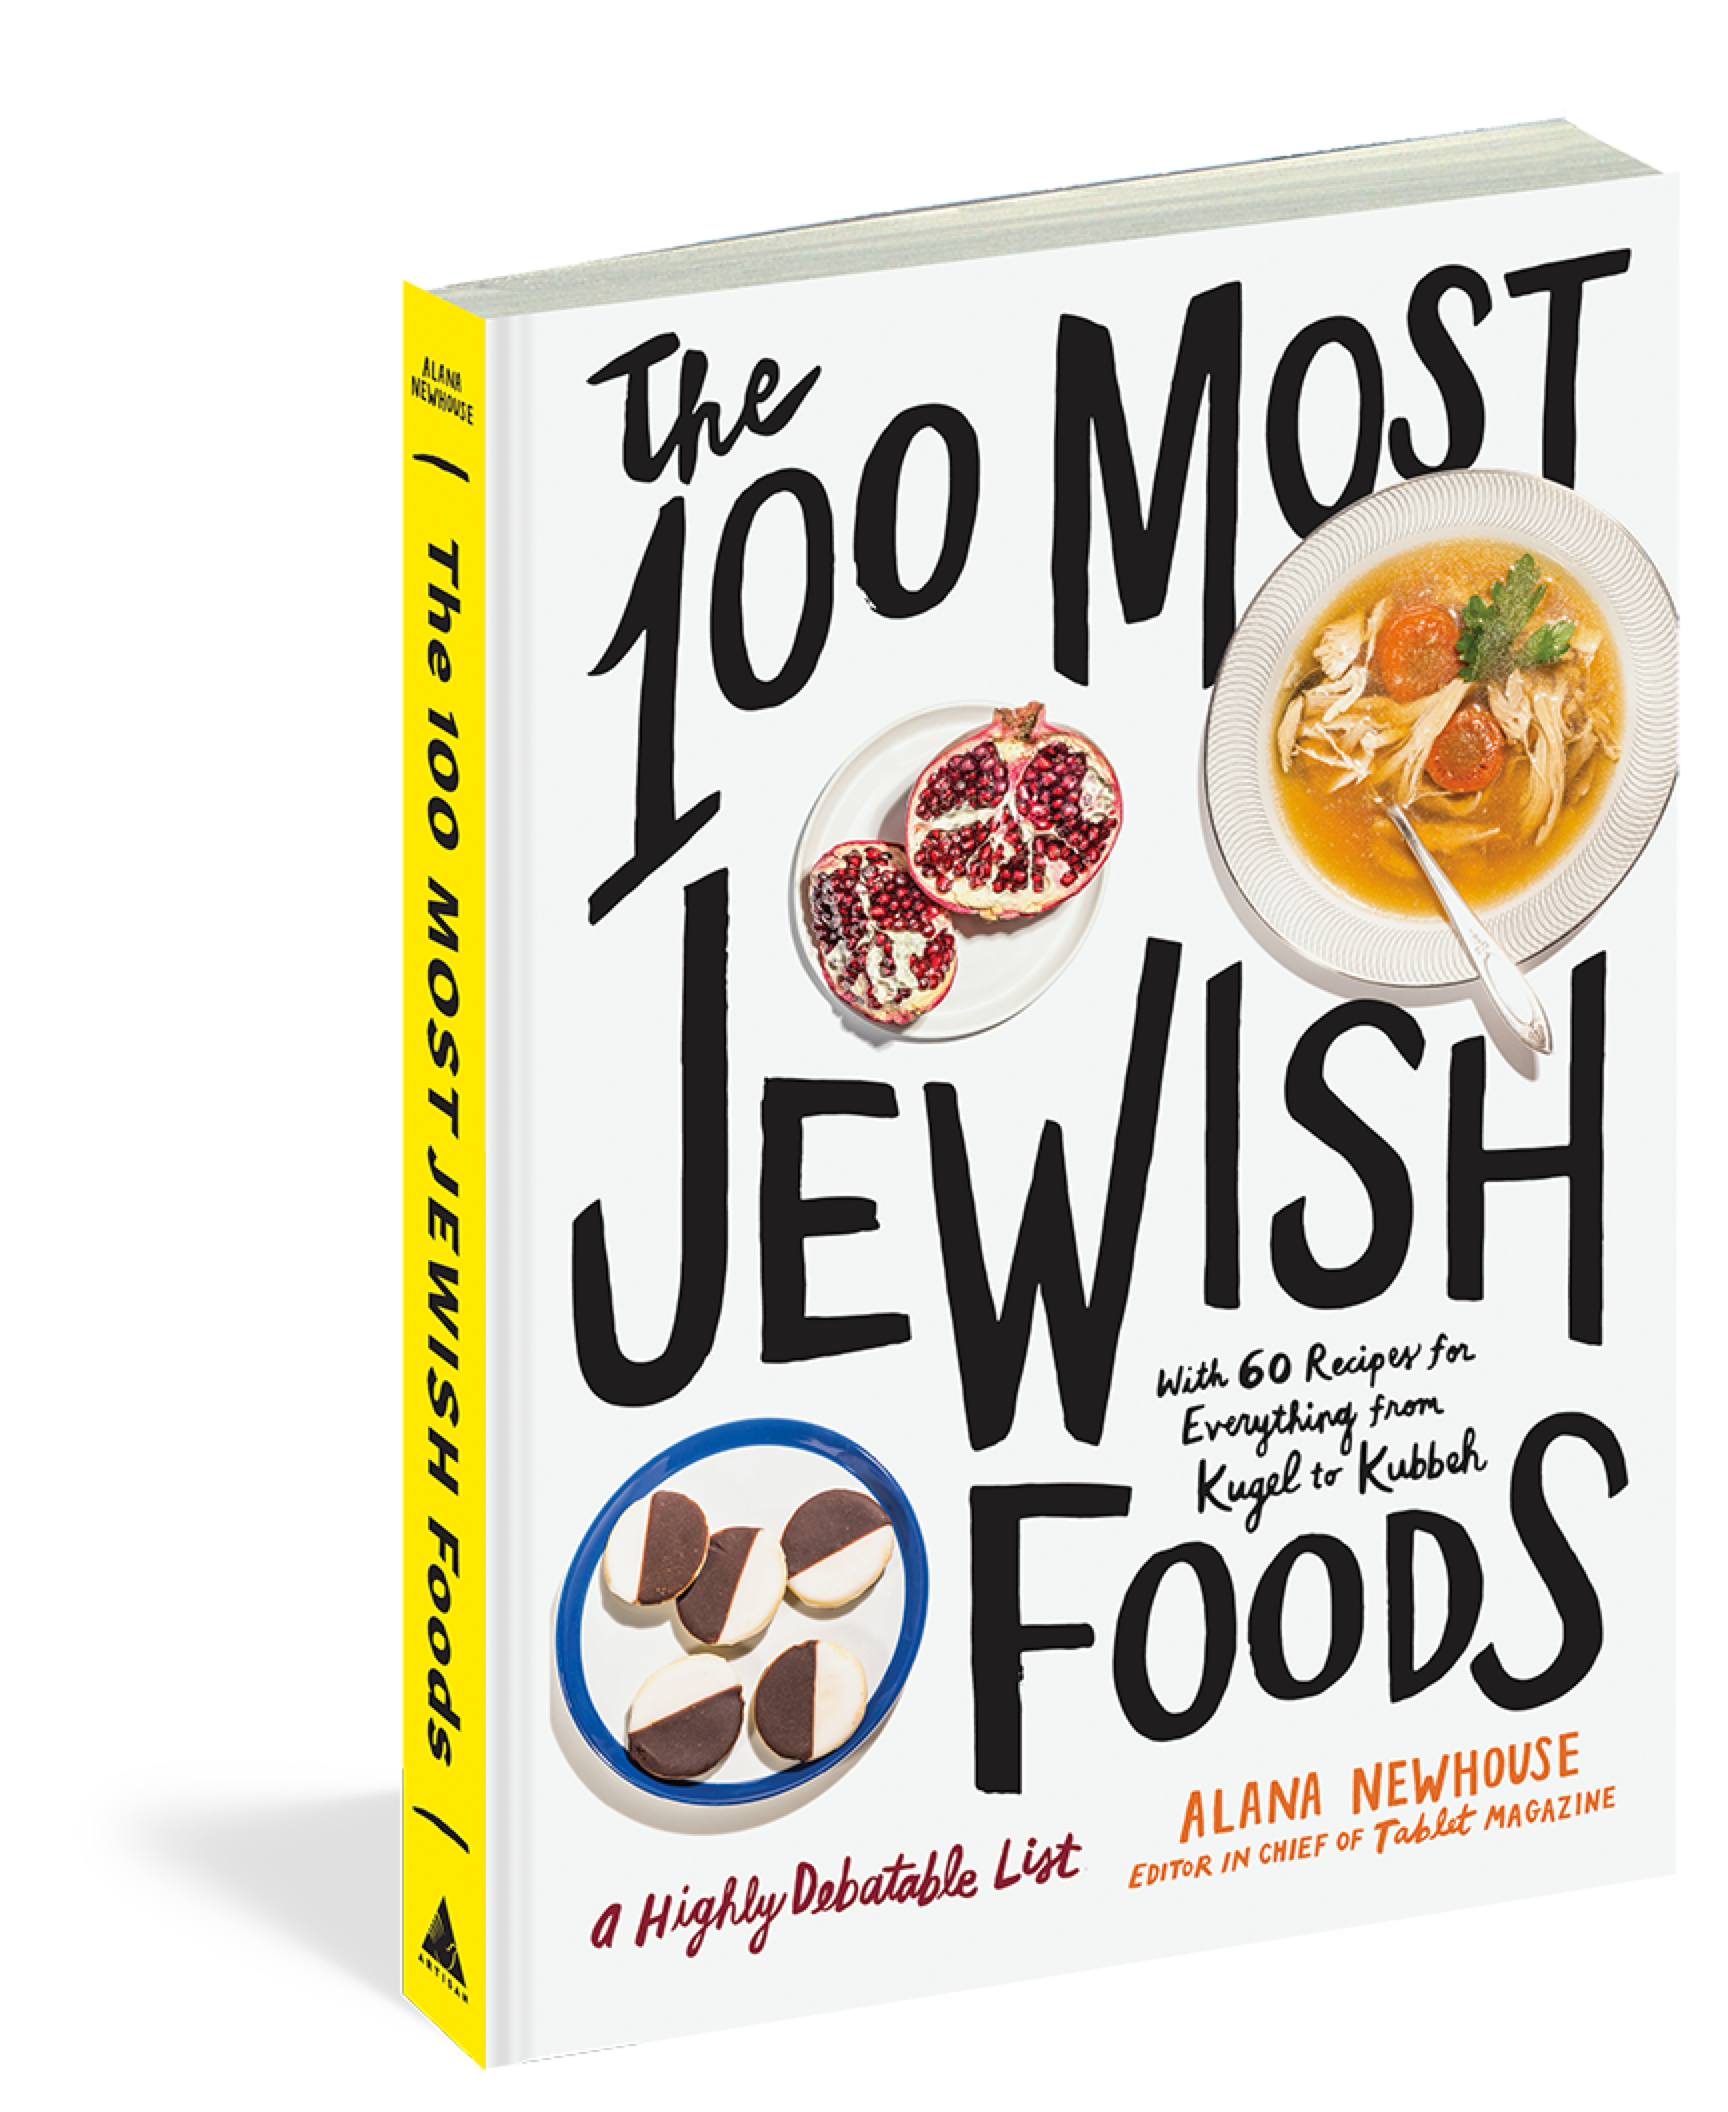 Buy The 100 Most Jewish Foods Book Image